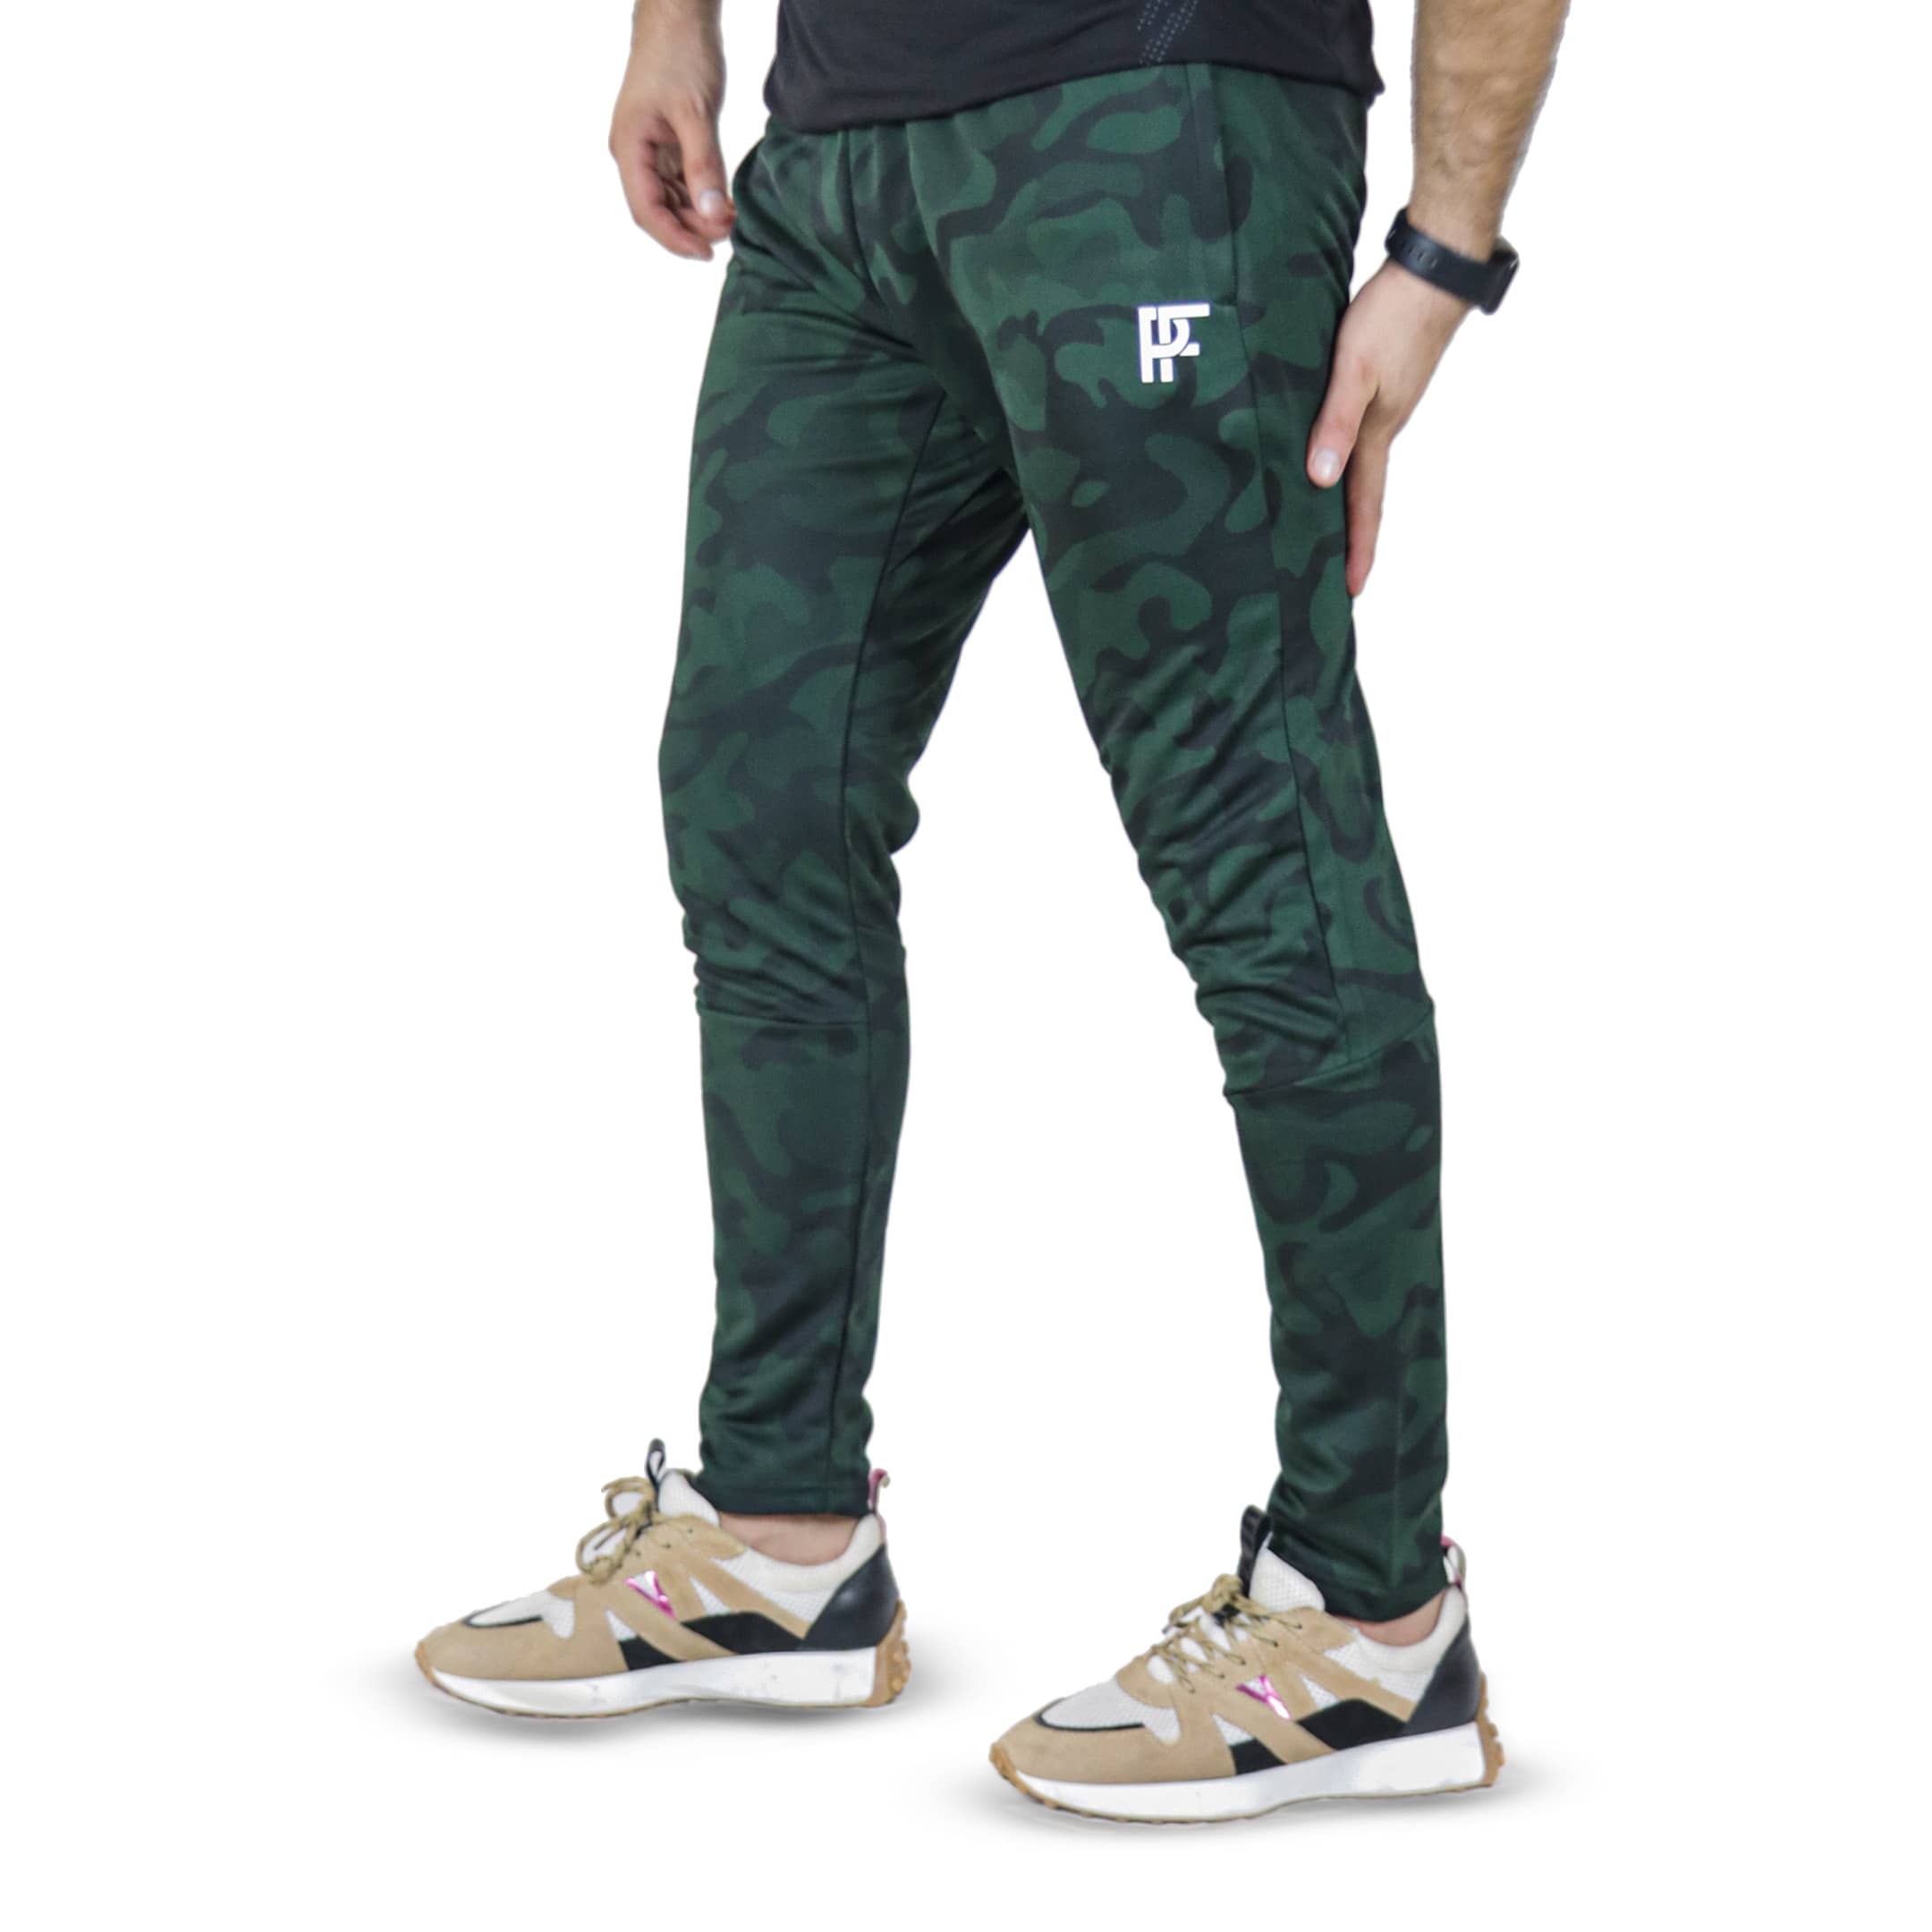 Commando Trouser in Green Color Export Quality.